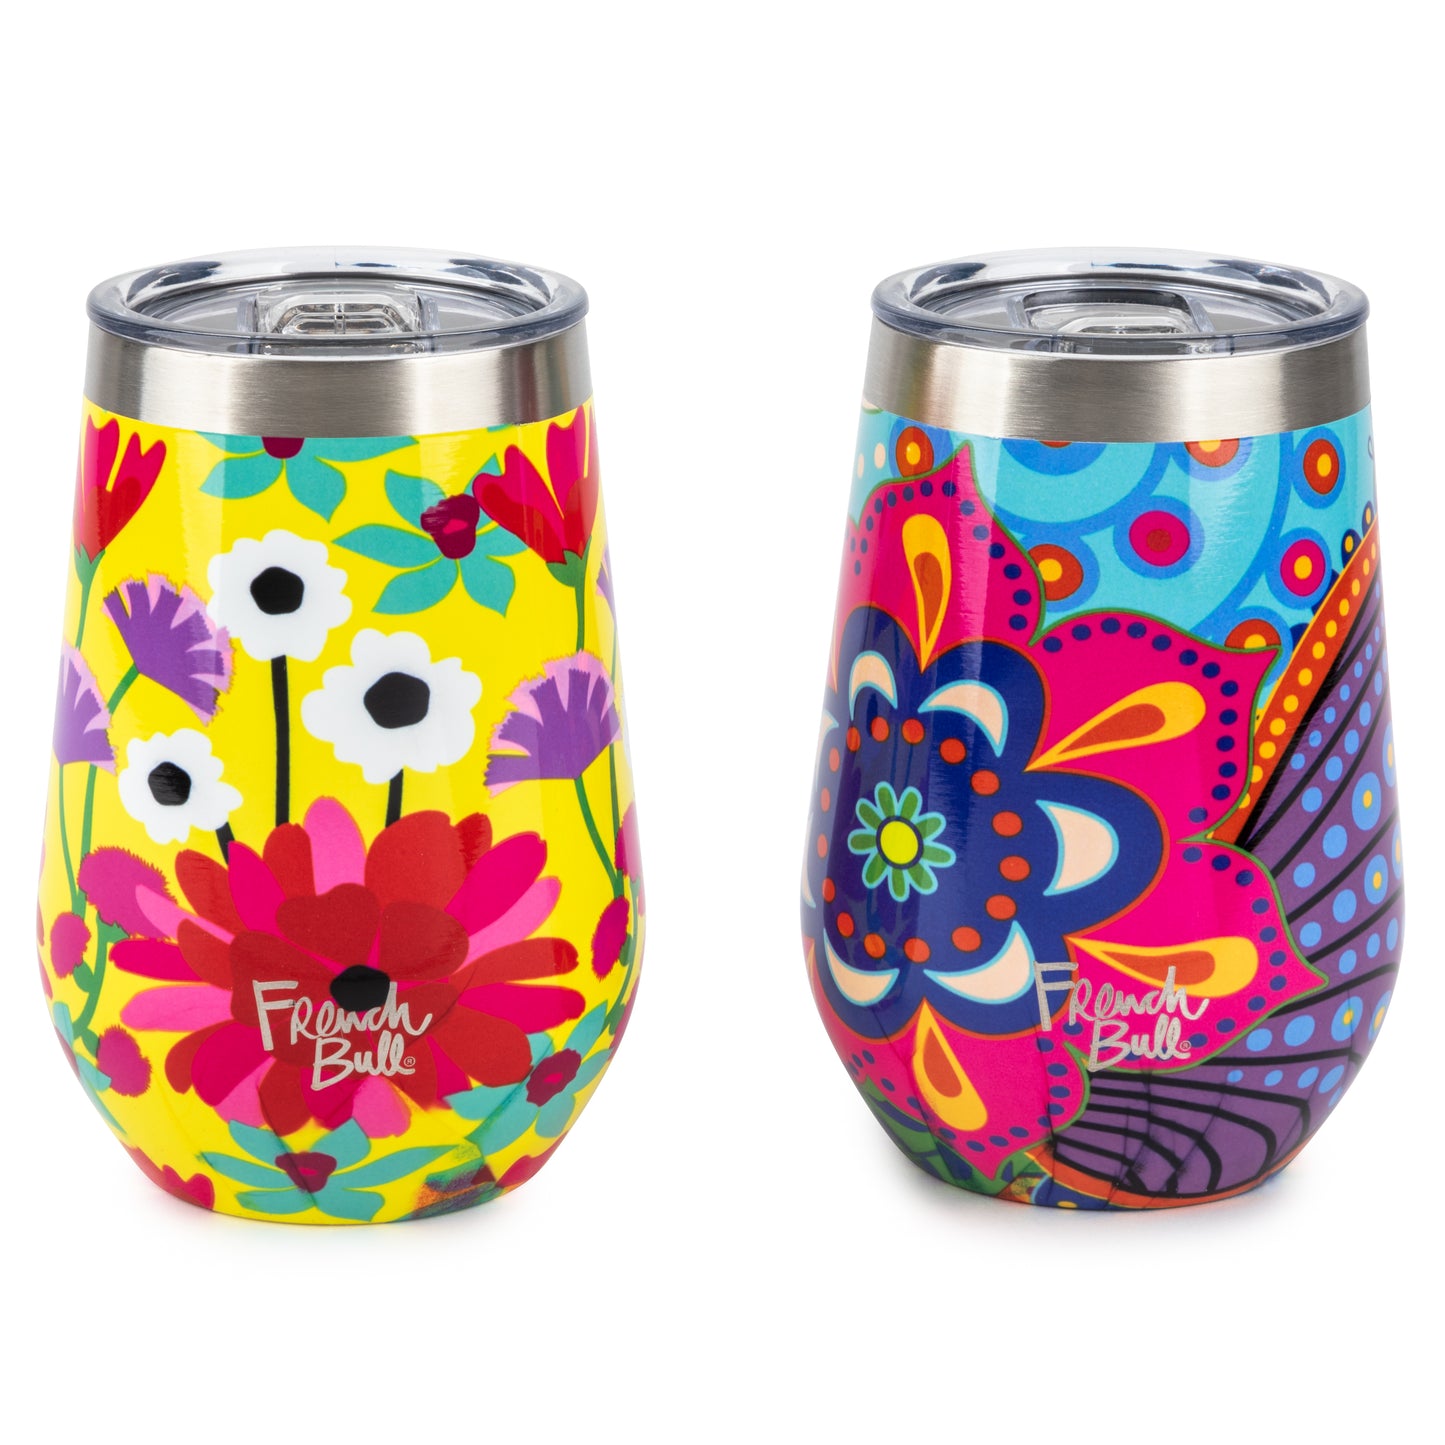 Christmas Gifts for Women - Insulated Wine Tumbler